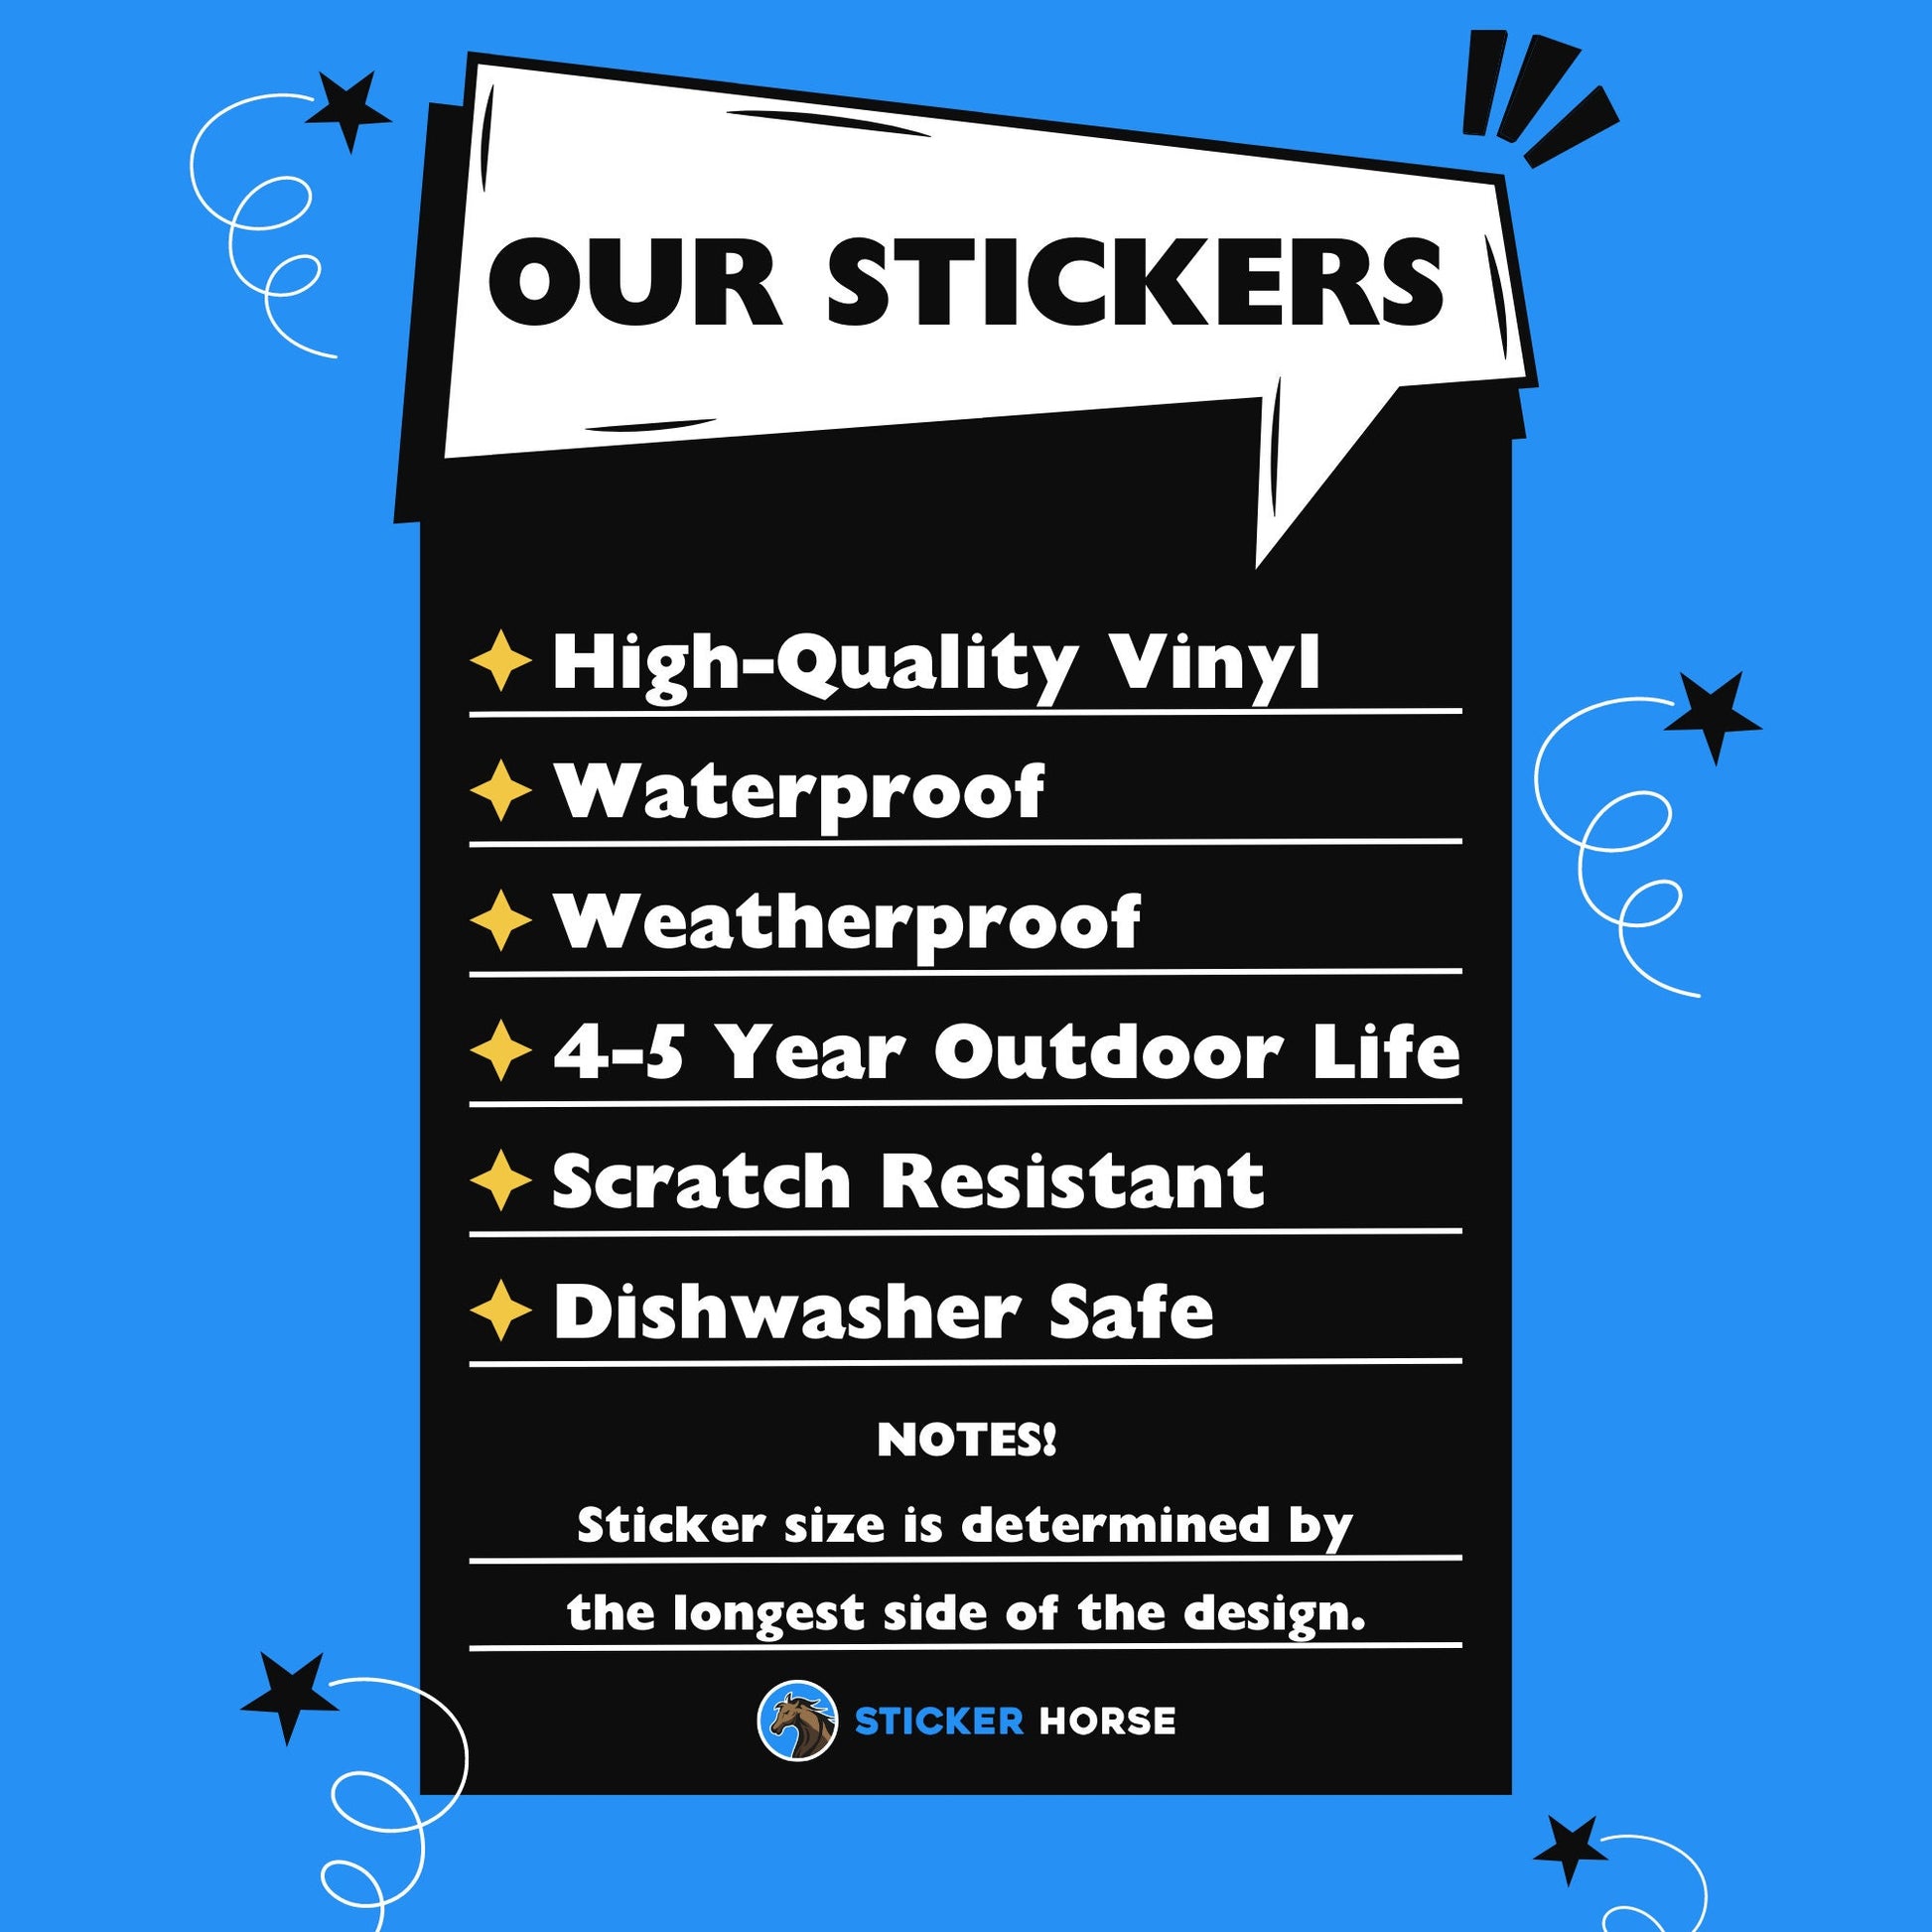 Get In Loser We're Doing Magic Sticker, LOTR Fans Sticker, Wizard Sticker, DnD Sticker, Fantasy Sticker, MTG Sticker, Nerdy Gift,Holographic